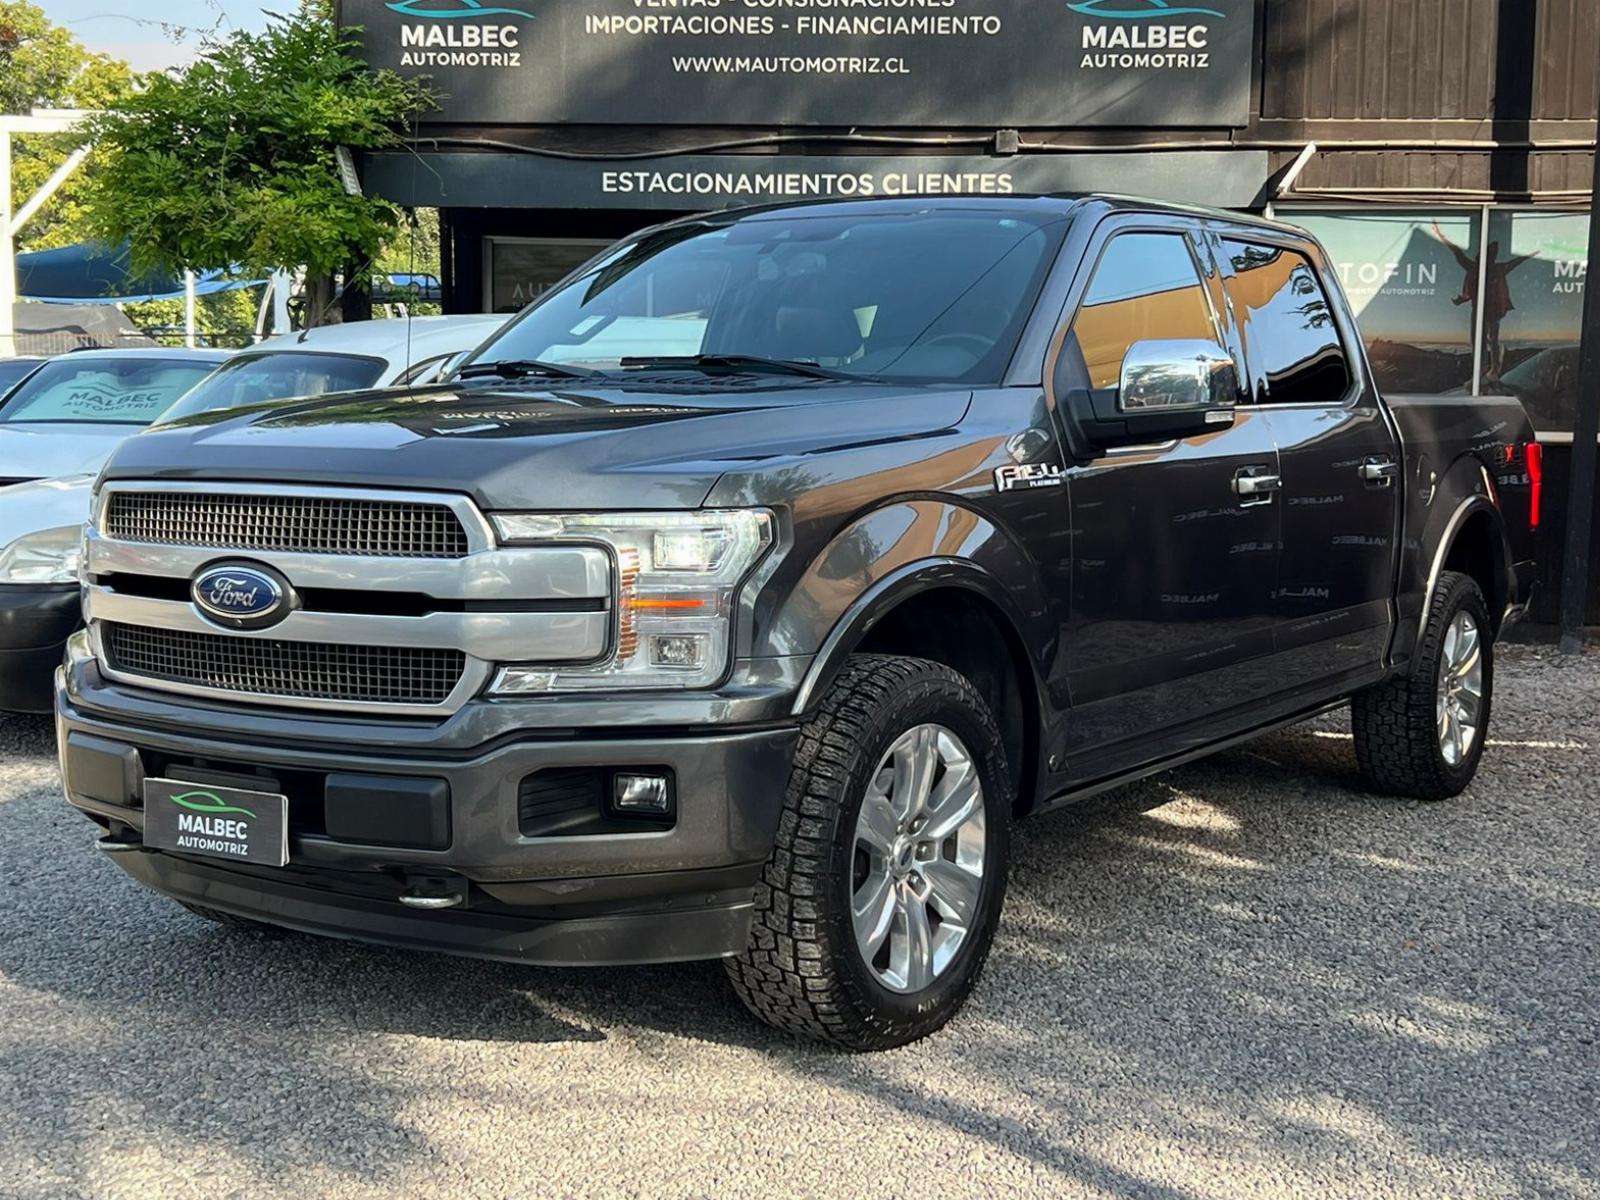 FORD F-150 PLATINUM 2018 ECOBOOST 3.5 FACTURABLE - FULL MOTOR